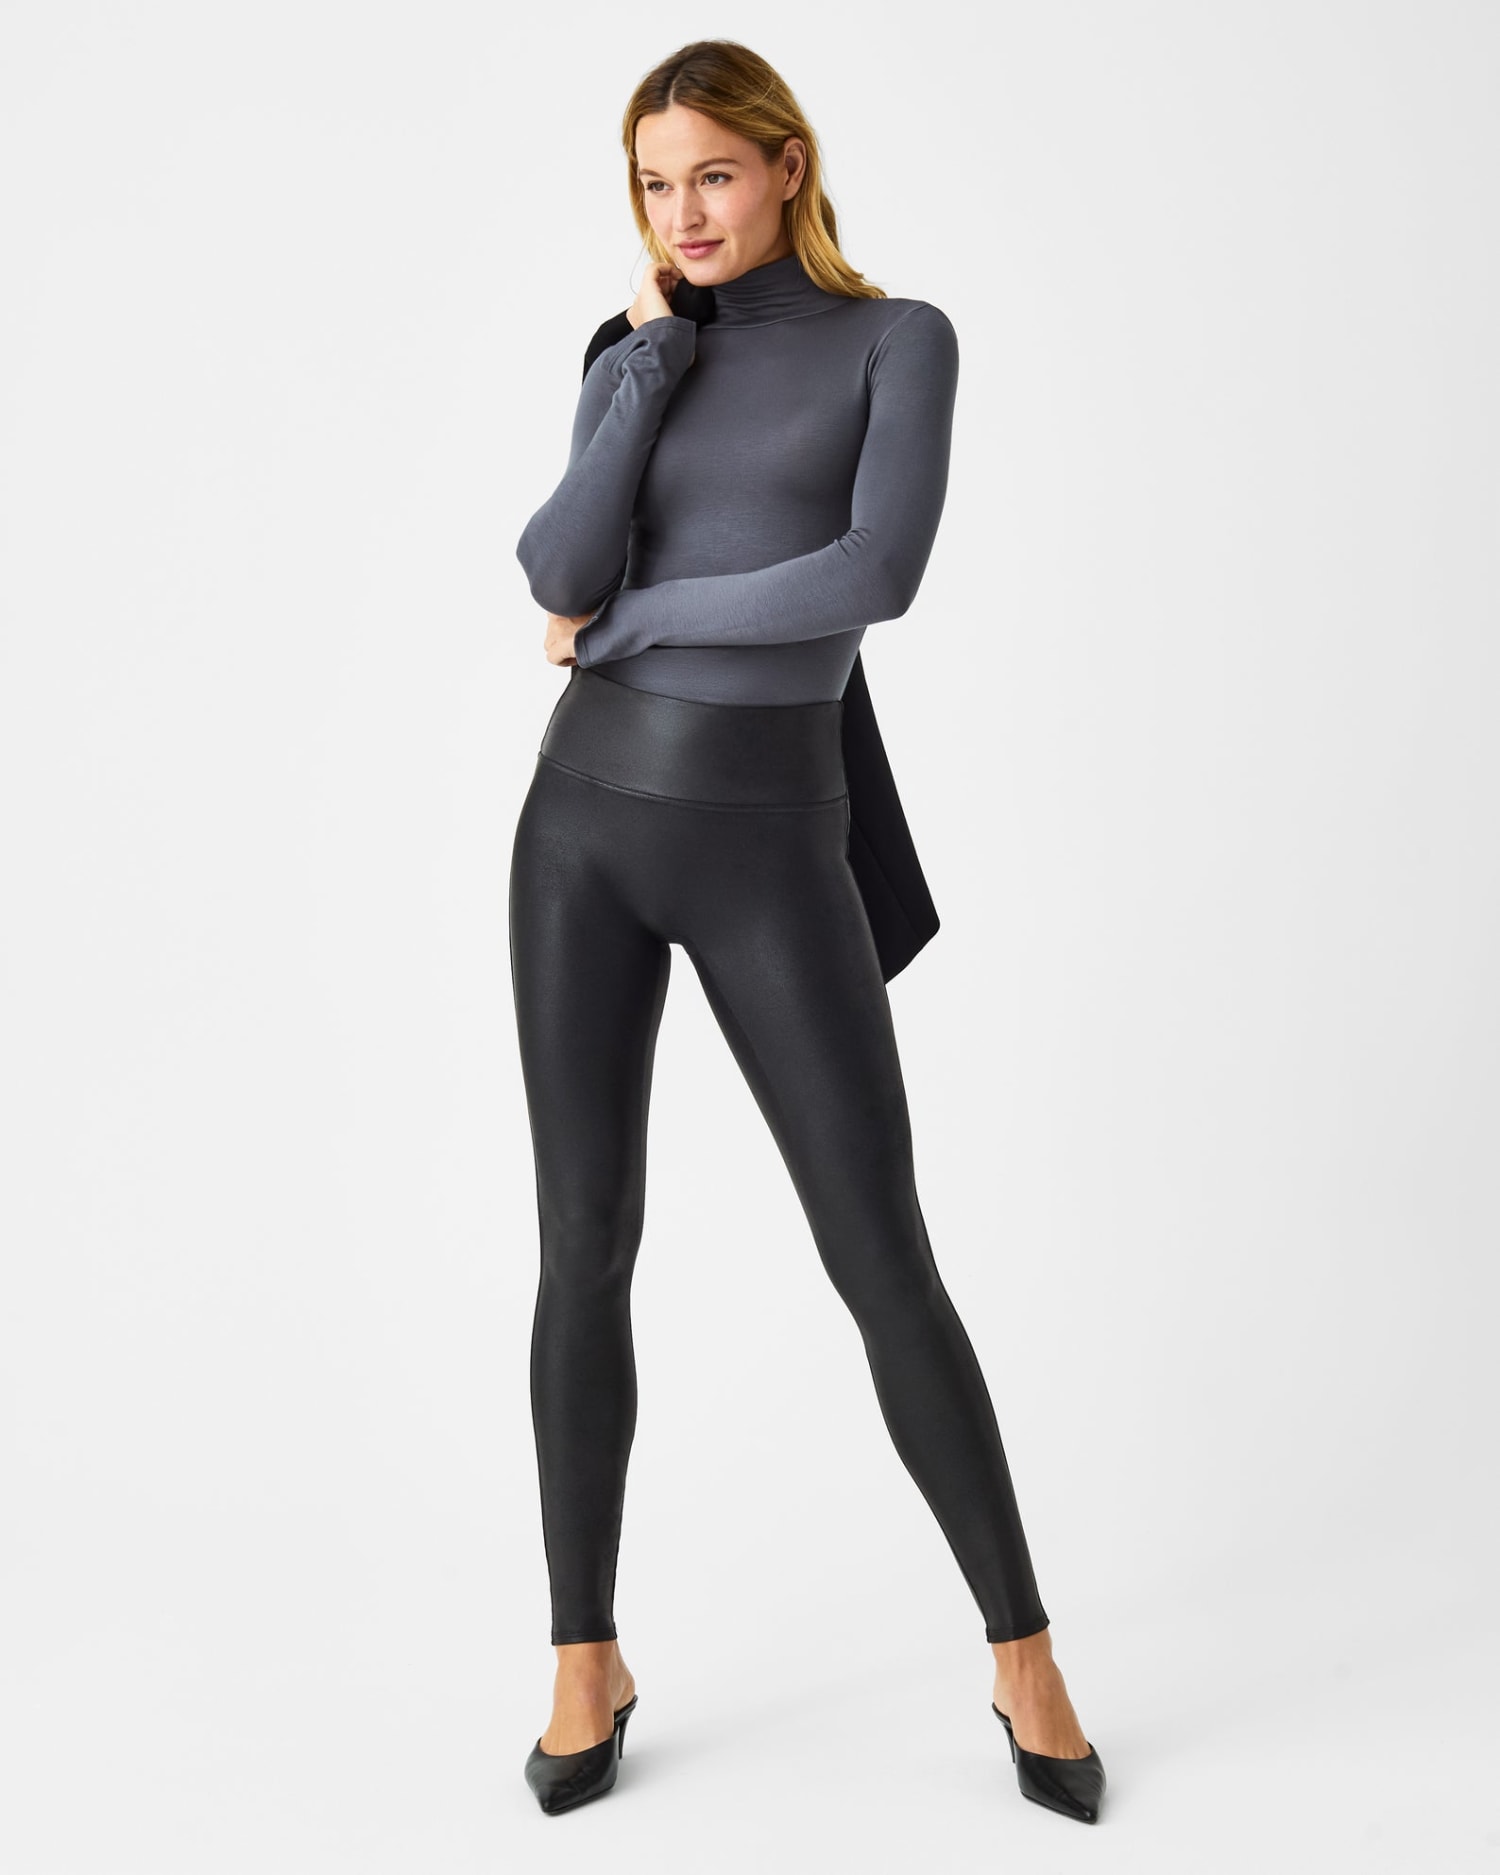 Nordstrom Rack's Black Friday: 93% Off on SPANX, Good American & More